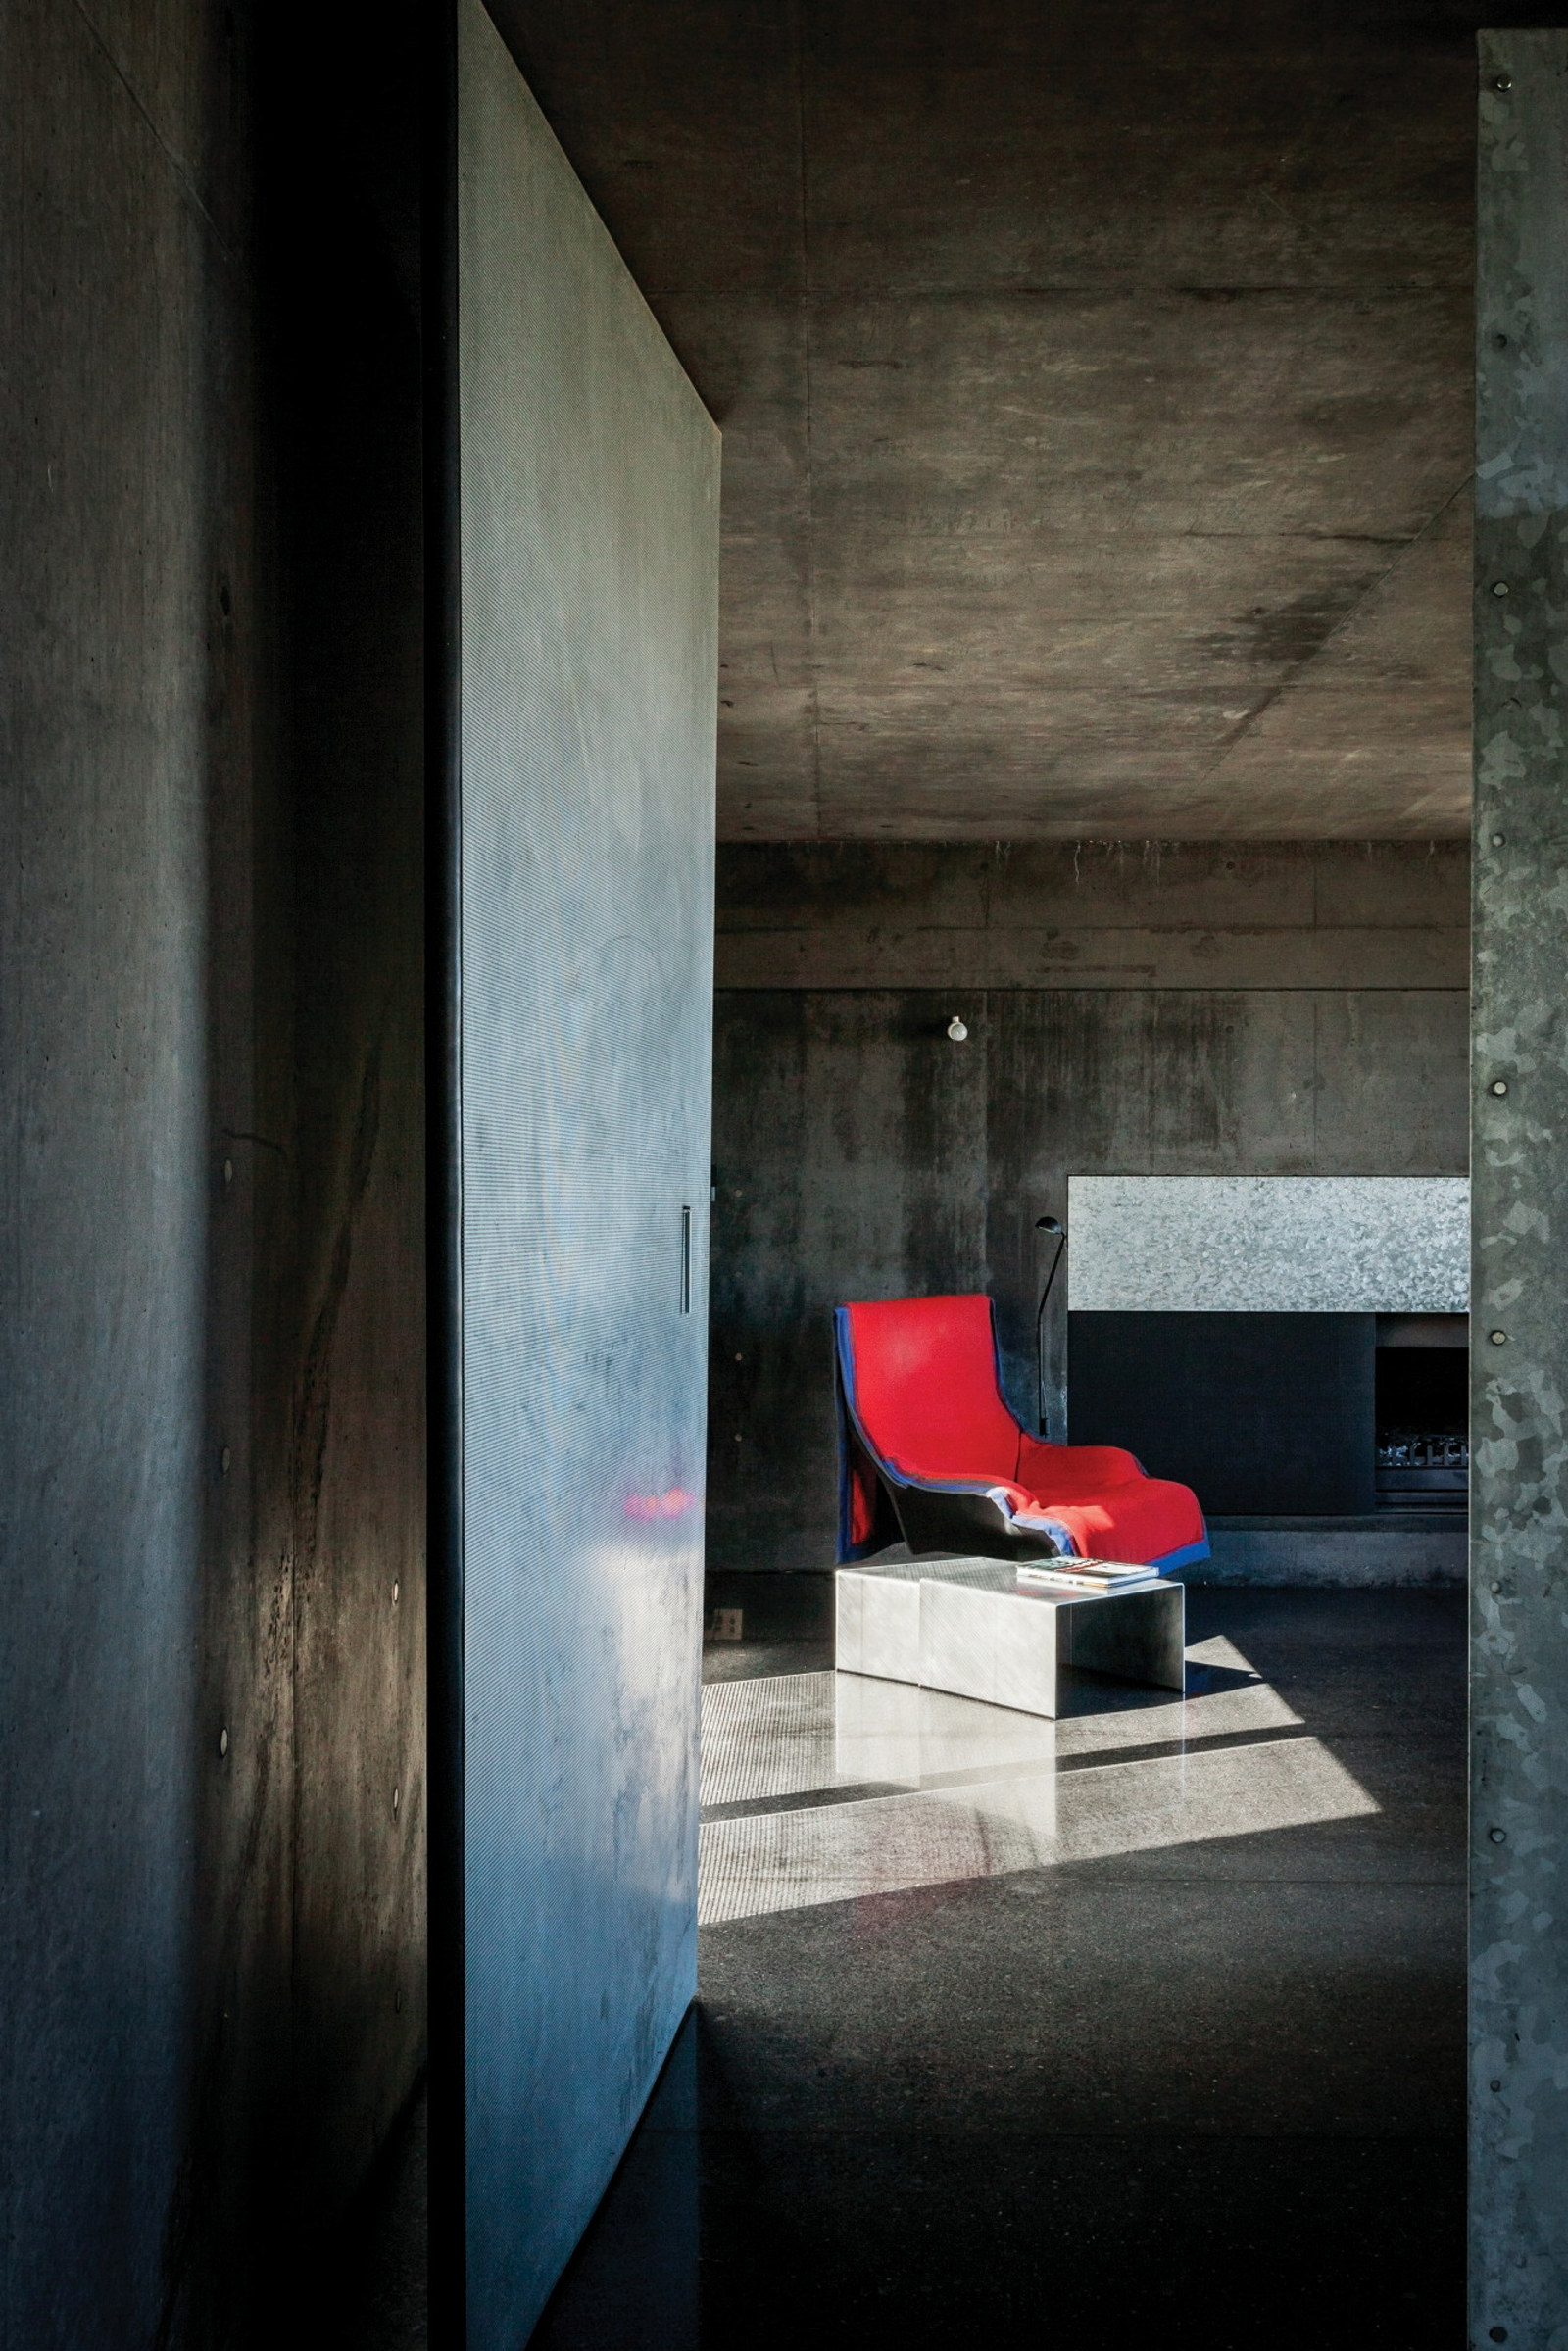 This is a photograph taken from outside the doorway to a concrete room with a bright red chair in the centre